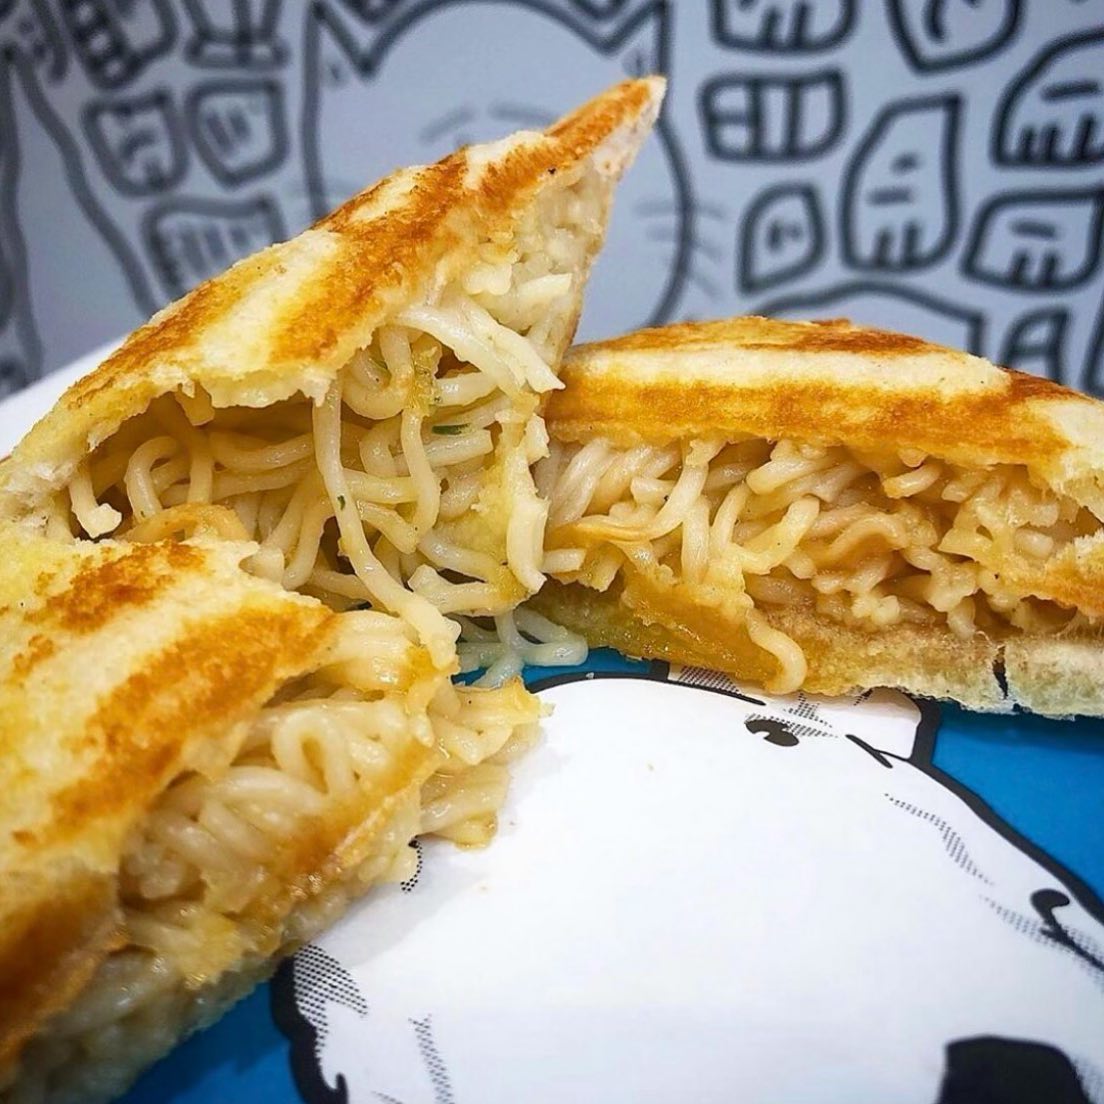 A retro Breville toastie stall is opening inside the Arndale Market, The Manc